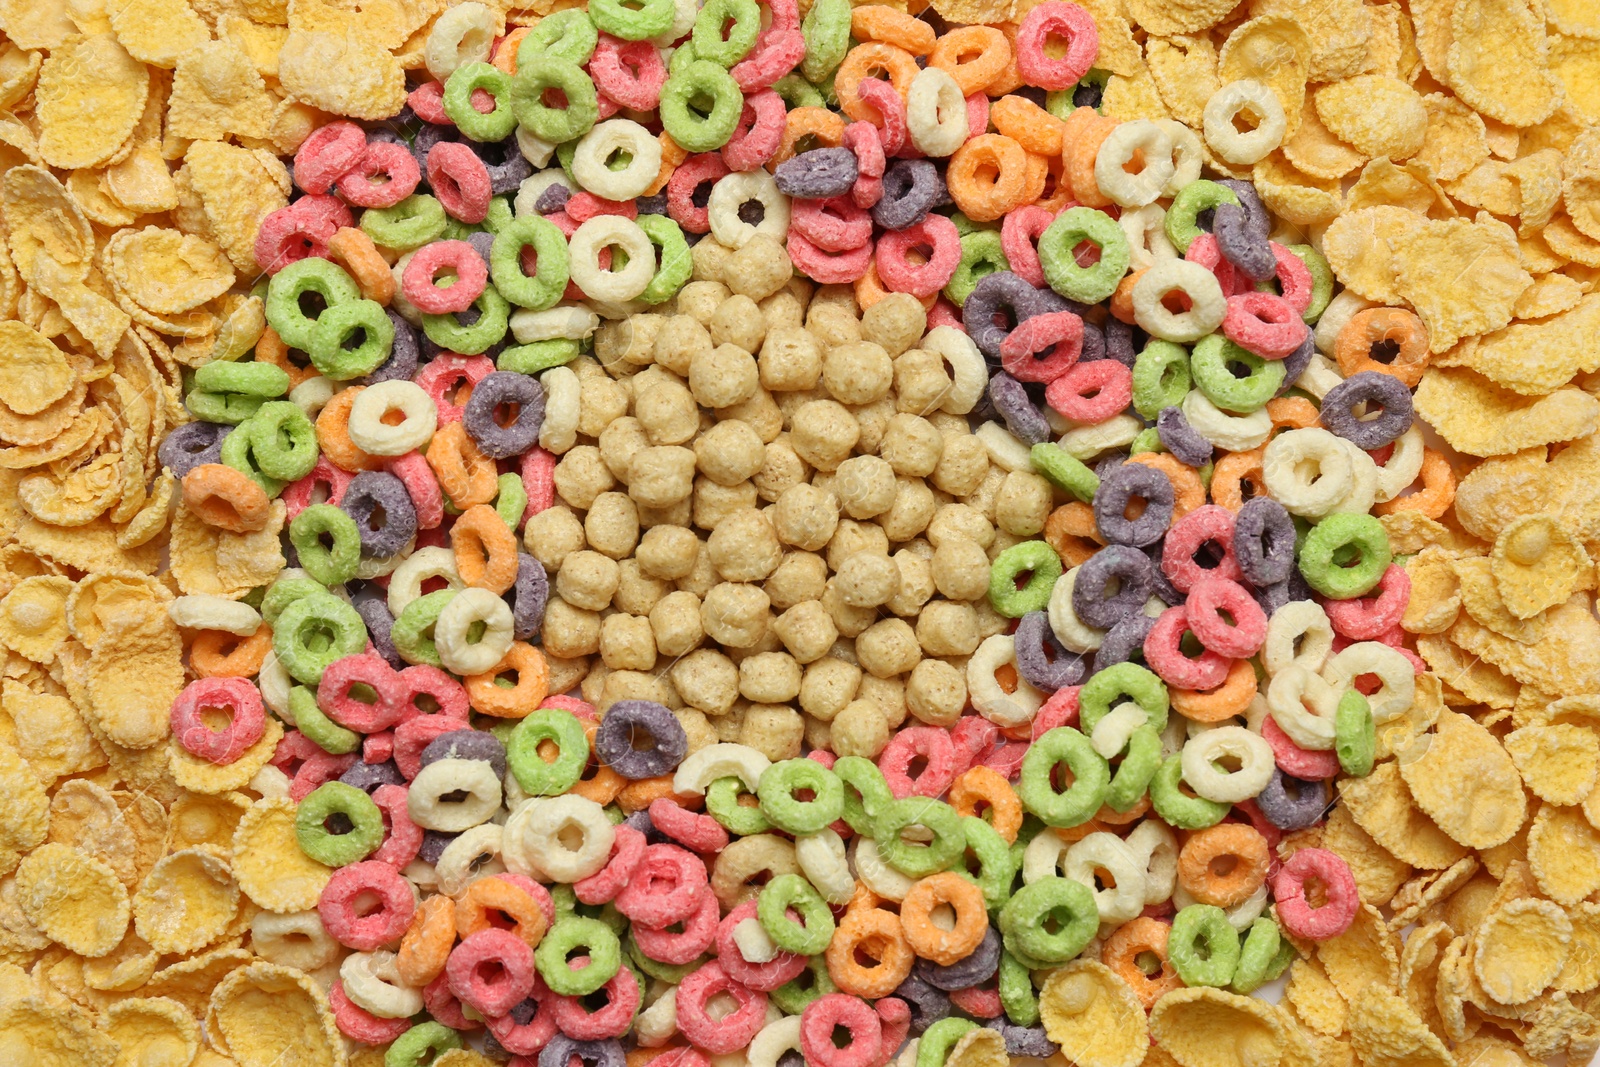 Photo of Different types of dry breakfast as background, top view